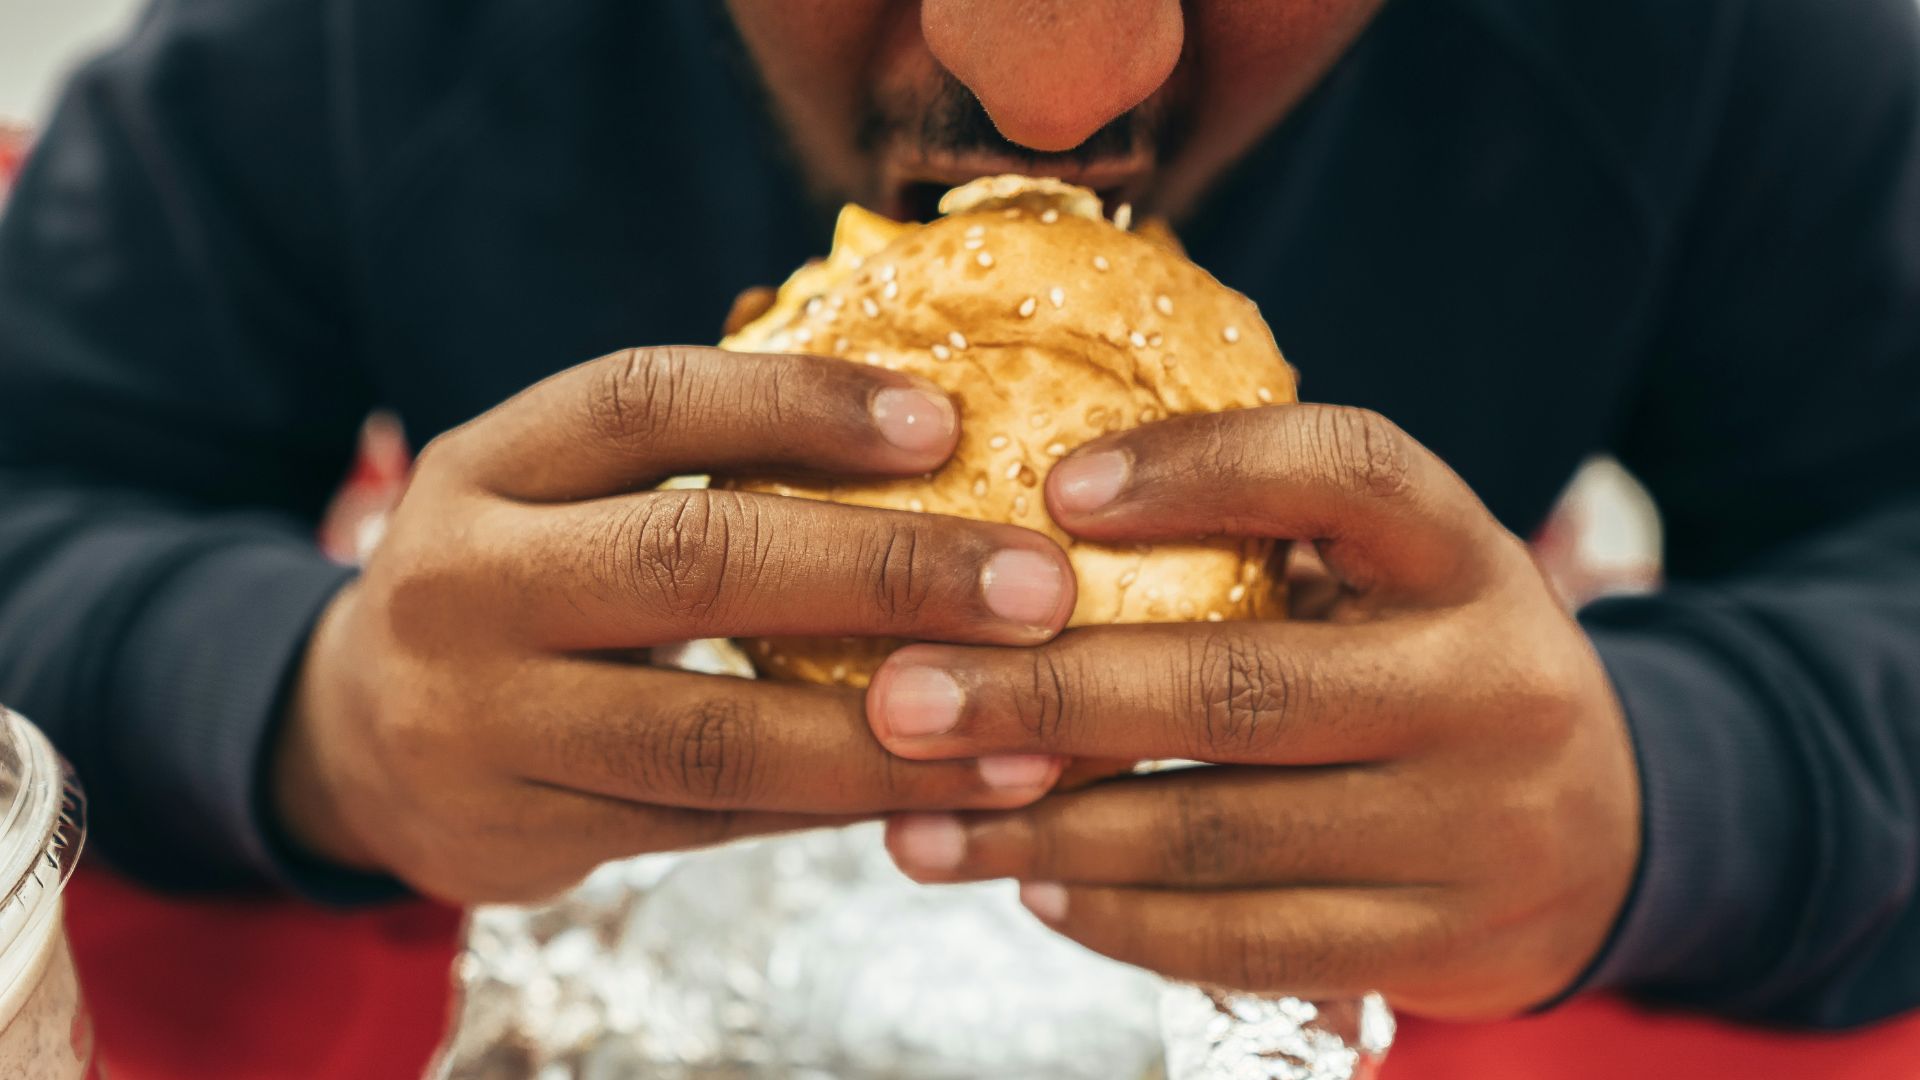 <p>As the $20 minimum wage law is set to take effect, California's fast-food industry is bracing for significant changes.    </p> <p>Outside of California, the nationwide changes we're witnessing, from layoffs to the closure of franchises and major chains declaring bankruptcy, illustrate the volatile nature of the fast-food industry in the U.S.   </p>